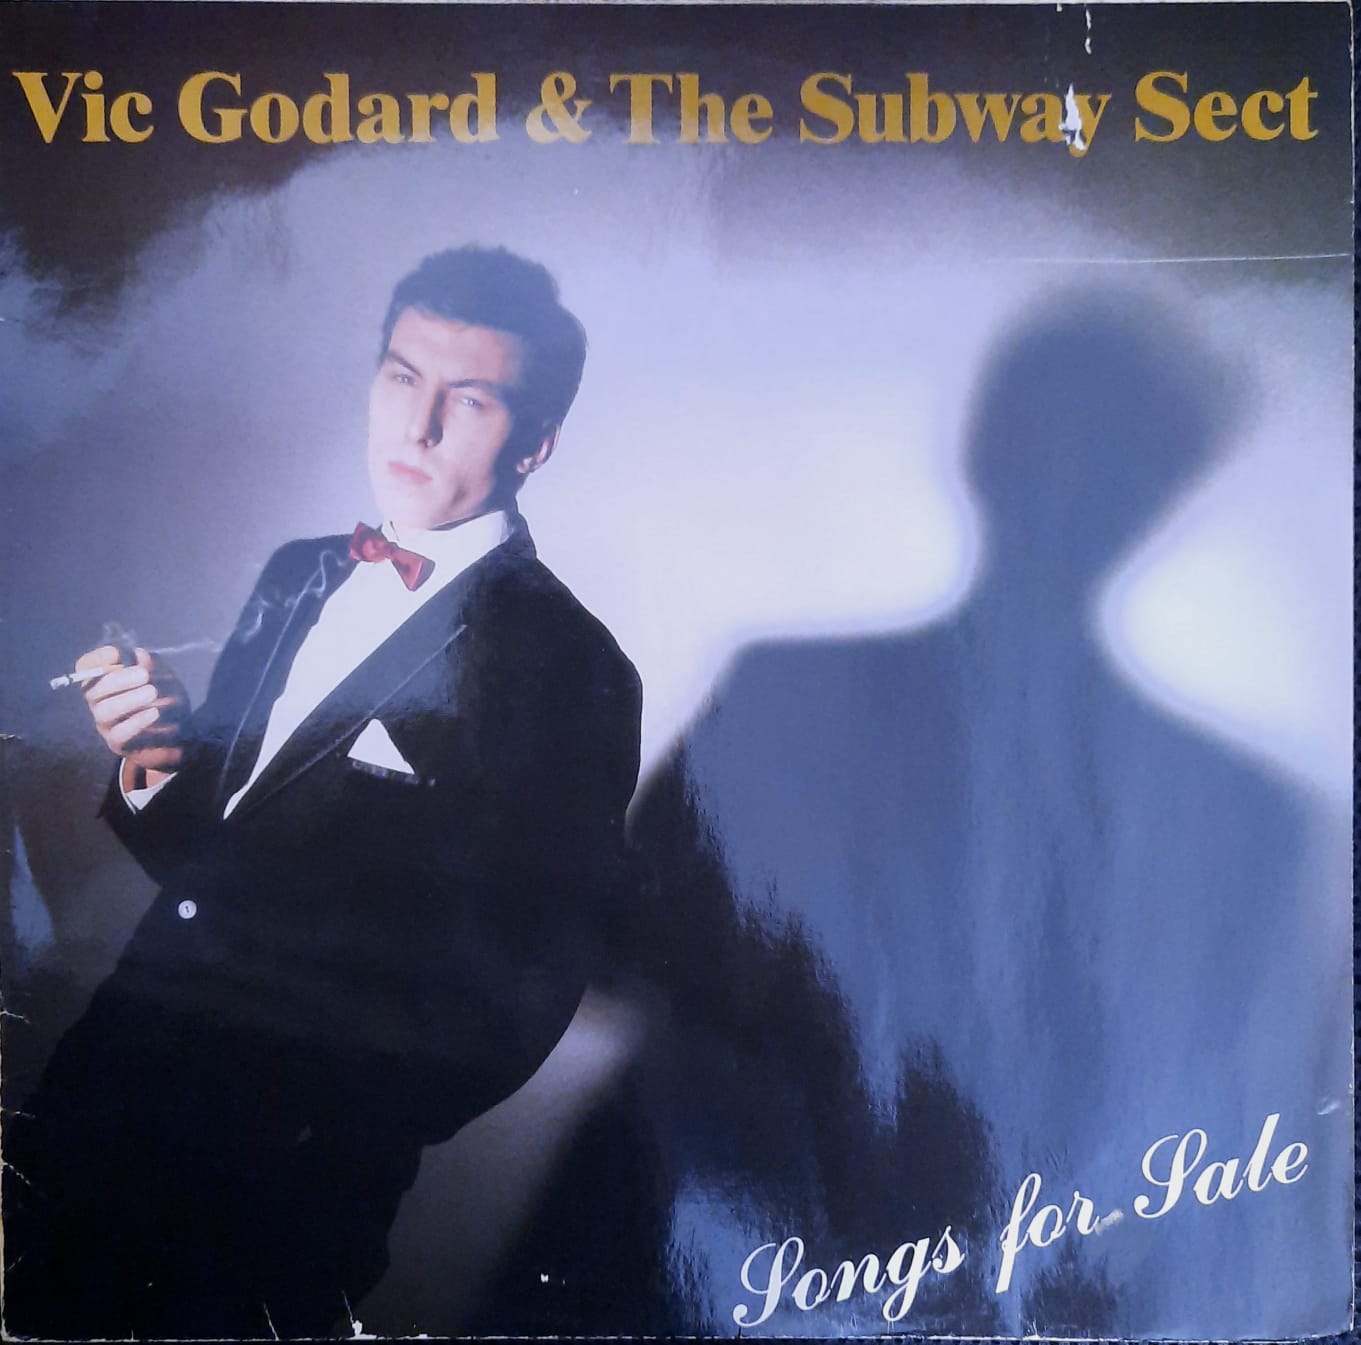 Vic Godard & The Subway Sect – Songs For Sale (LP, Alemania, 1982)